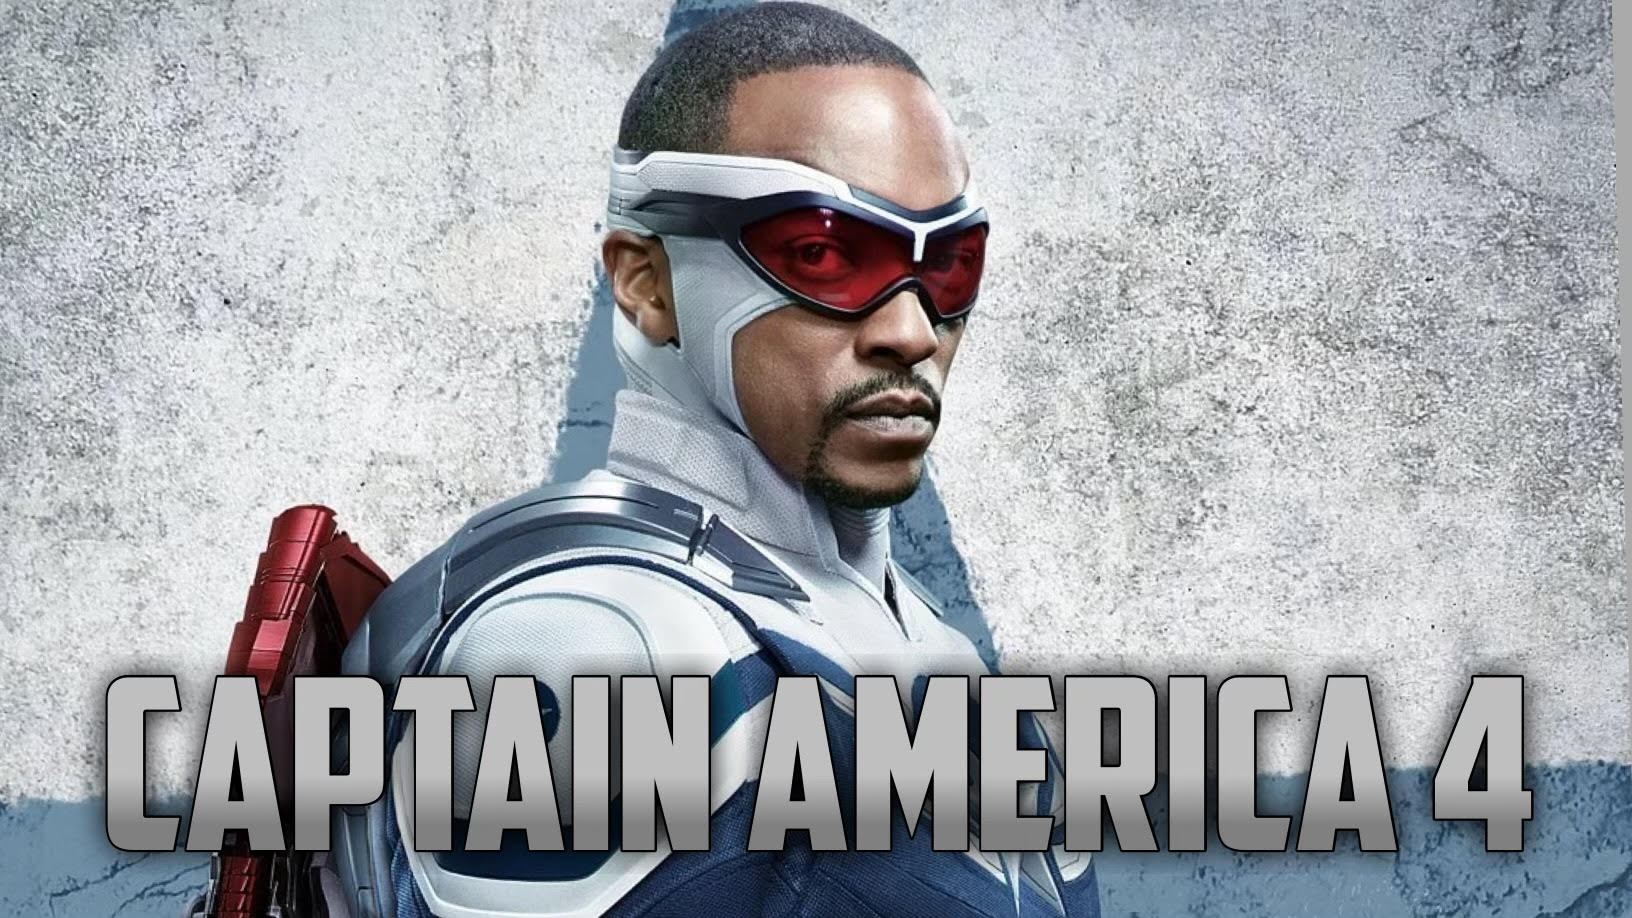 ‘Captain America 4’ Officially A Go As Anthony Mackie Closes Deal To Star